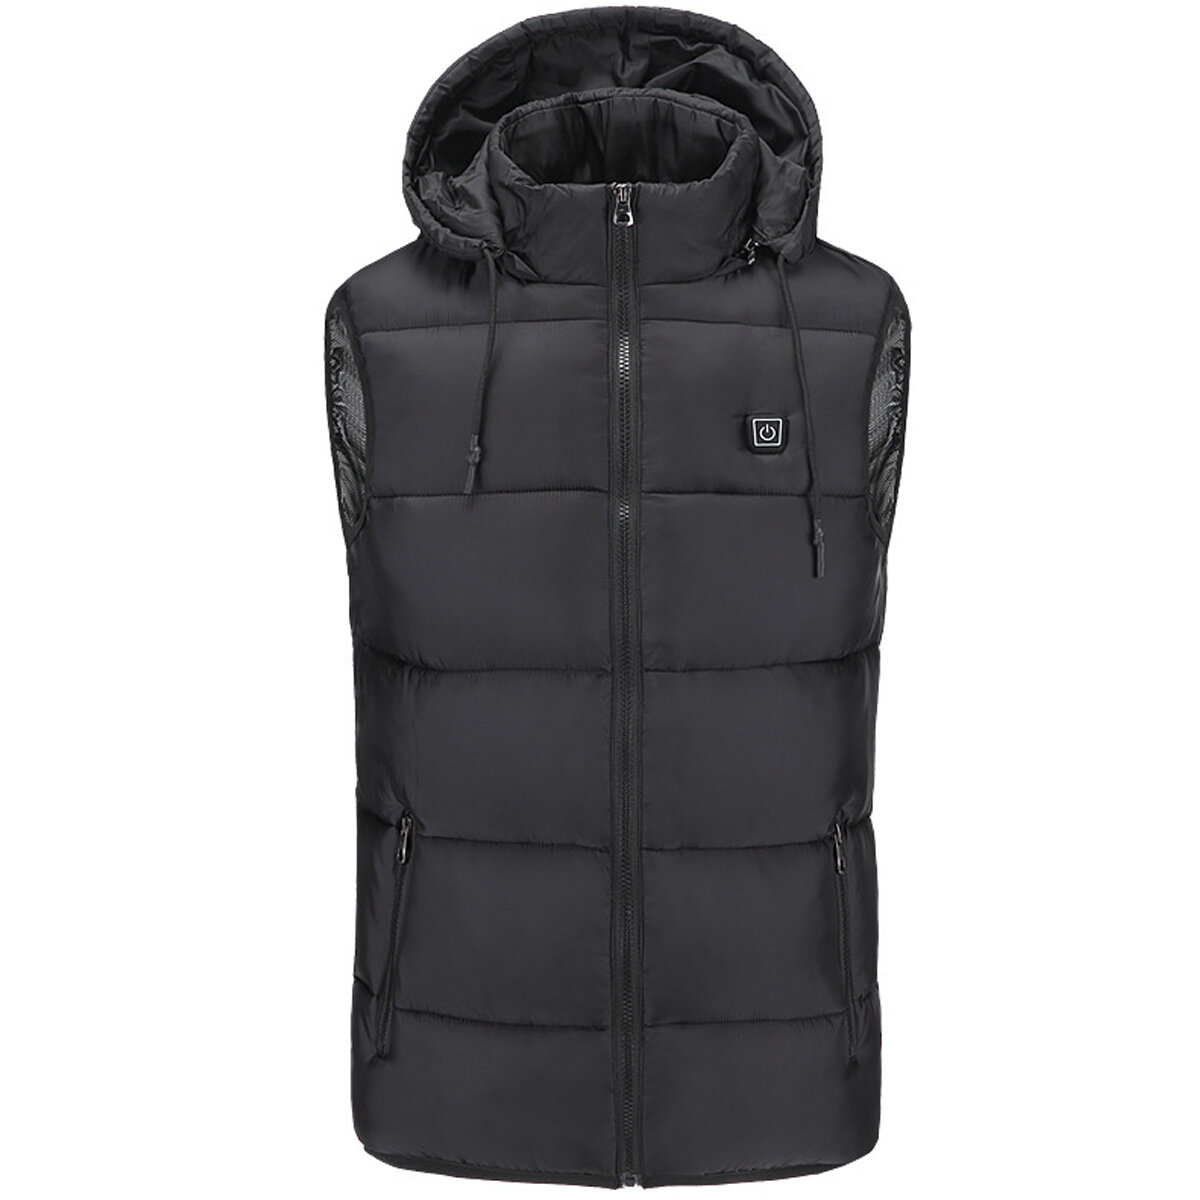 Image of 25-45°C Electric Heated Vest Waistcoat Hooded Winter Warmer USB Charge Heating Jacket Clothing